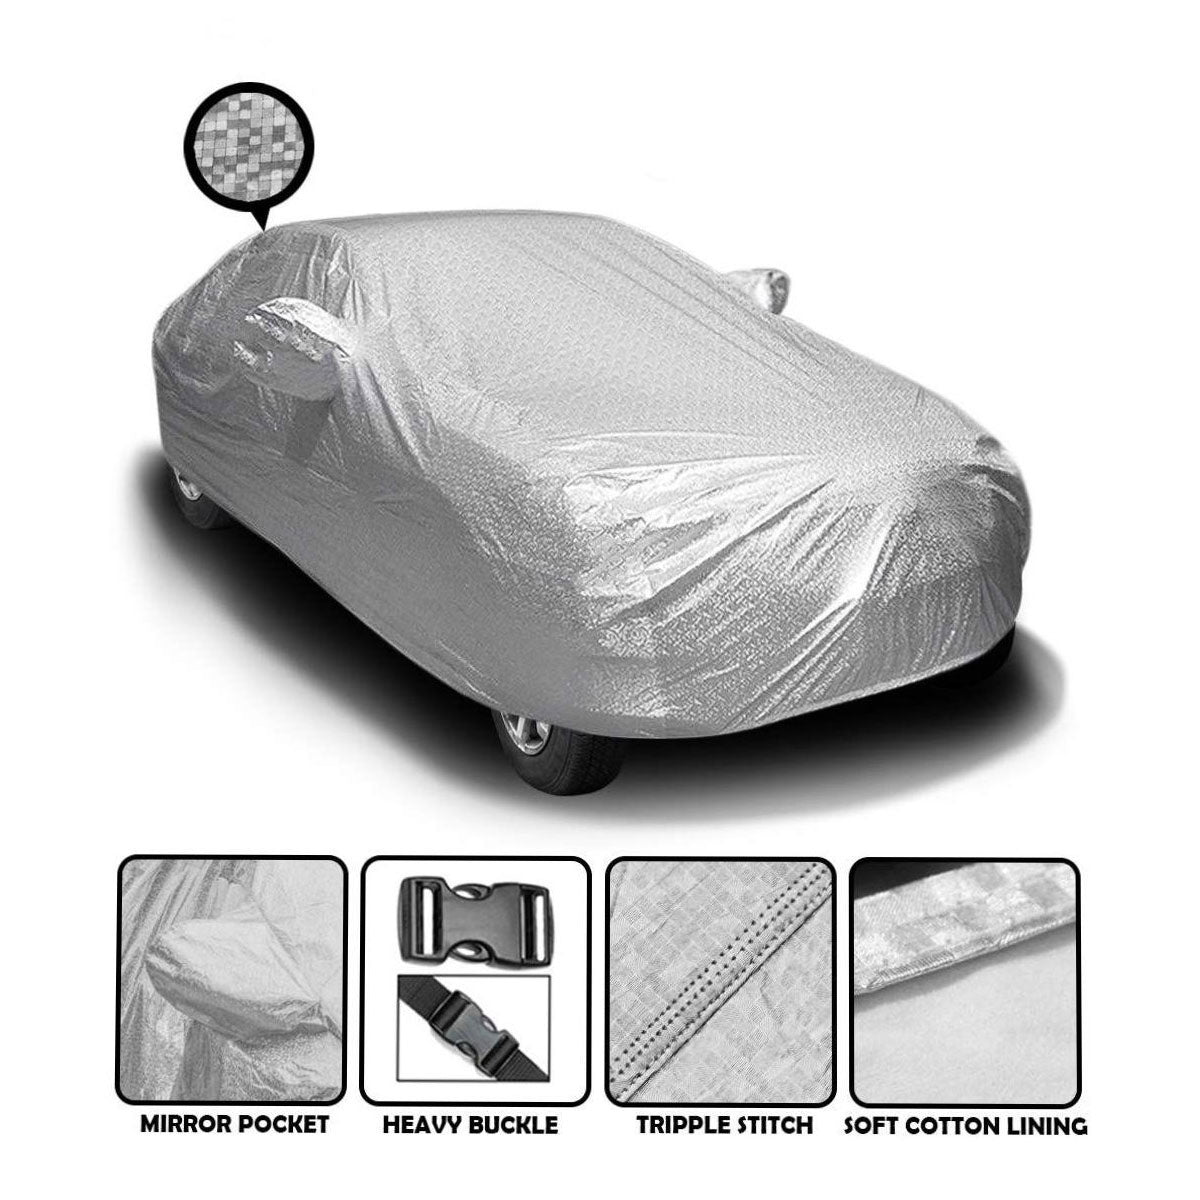 Oshotto Spyro Silver Anti Reflective, dustproof and Water Proof Car Body Cover with Mirror Pockets For Maruti Suzuki 800